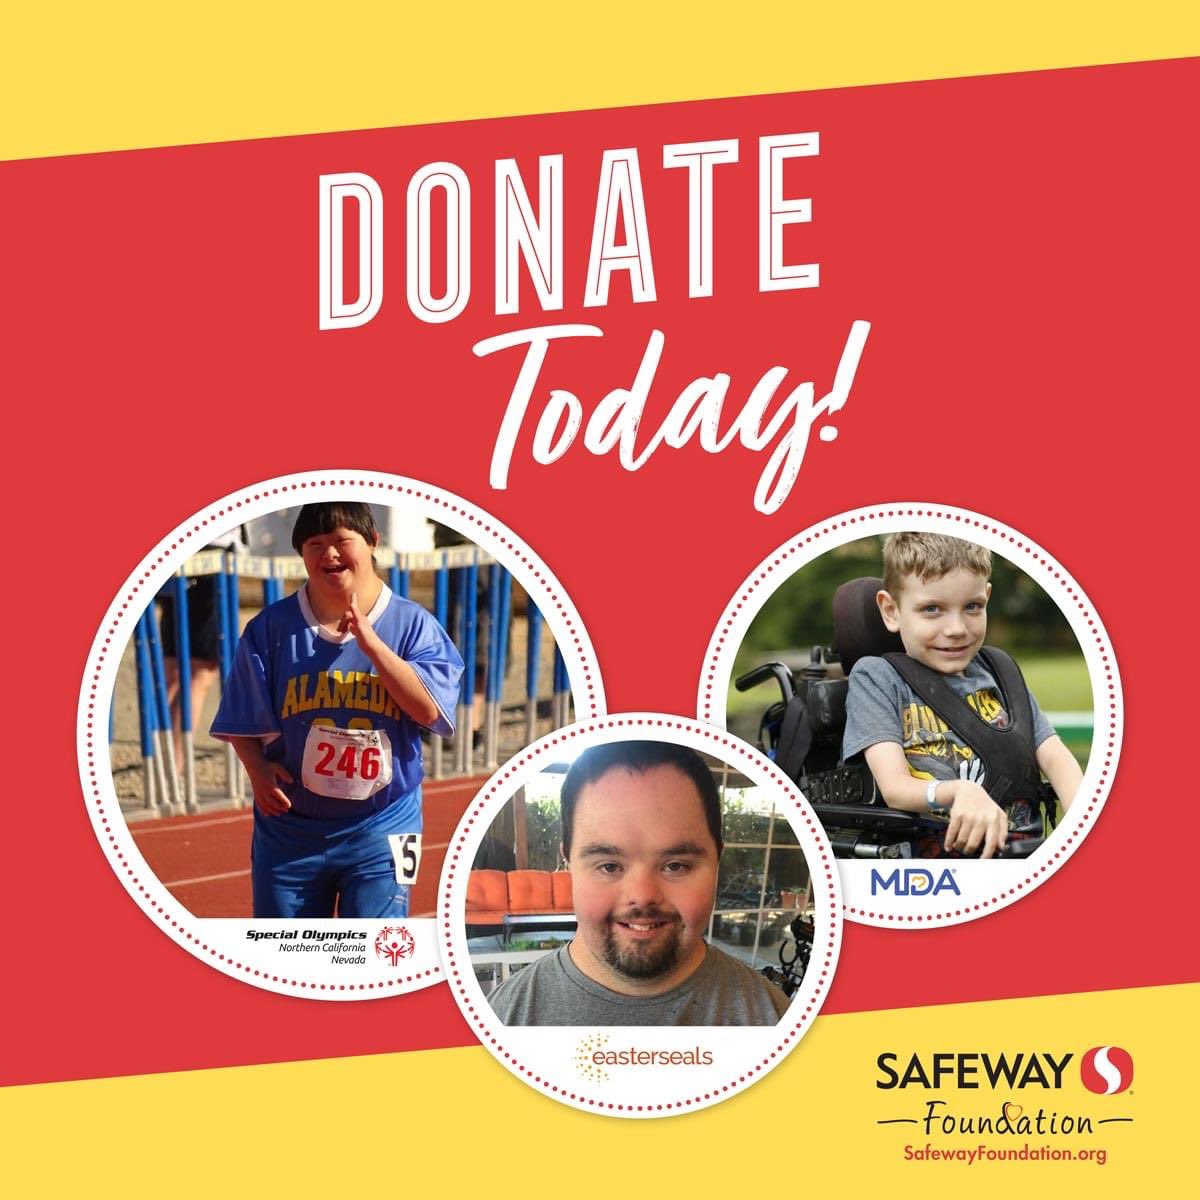 Visit @Safeway to support Special Olympics! Our friends at Safeway are raising funds in Northern California stores all month long to support programs designed to inspire and enable people who have diverse abilities. Look for the donation prompts at check stands through 8/31!